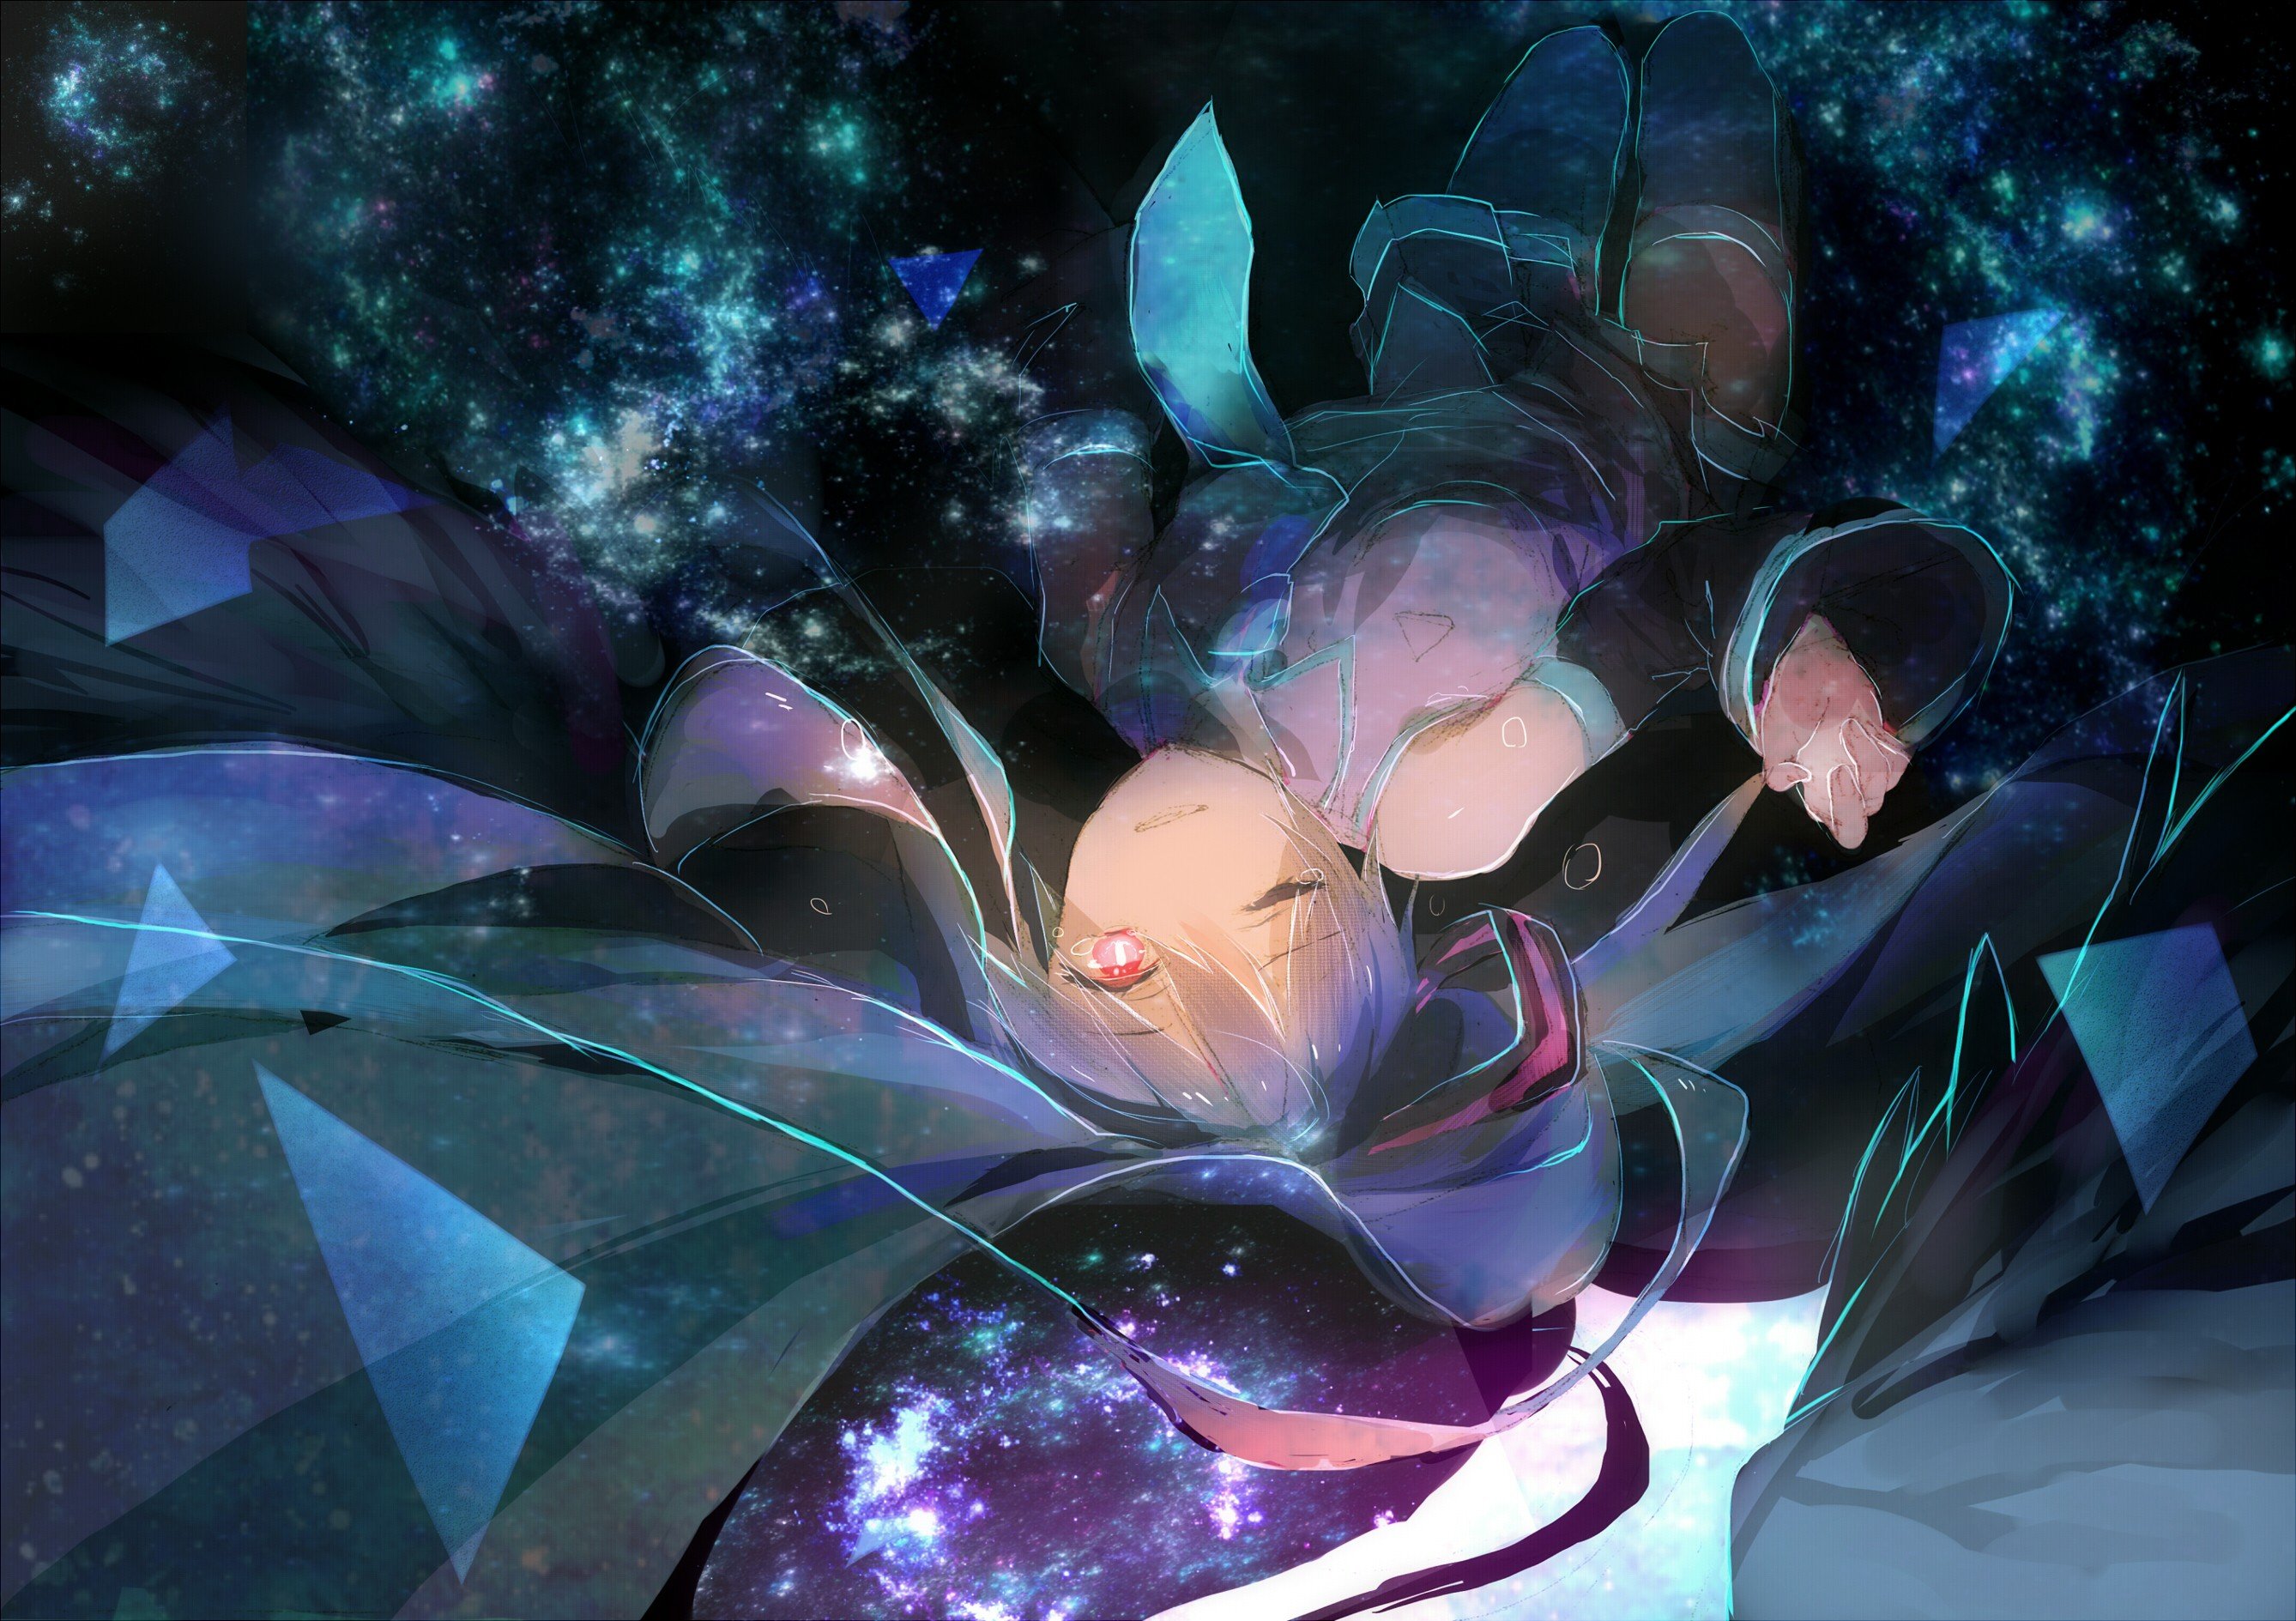 Vocaloid, Hatsune Miku, Floating, Thigh highs, Long hair, Neckties, Red eyes, Space, Anime girls, Anime Wallpaper